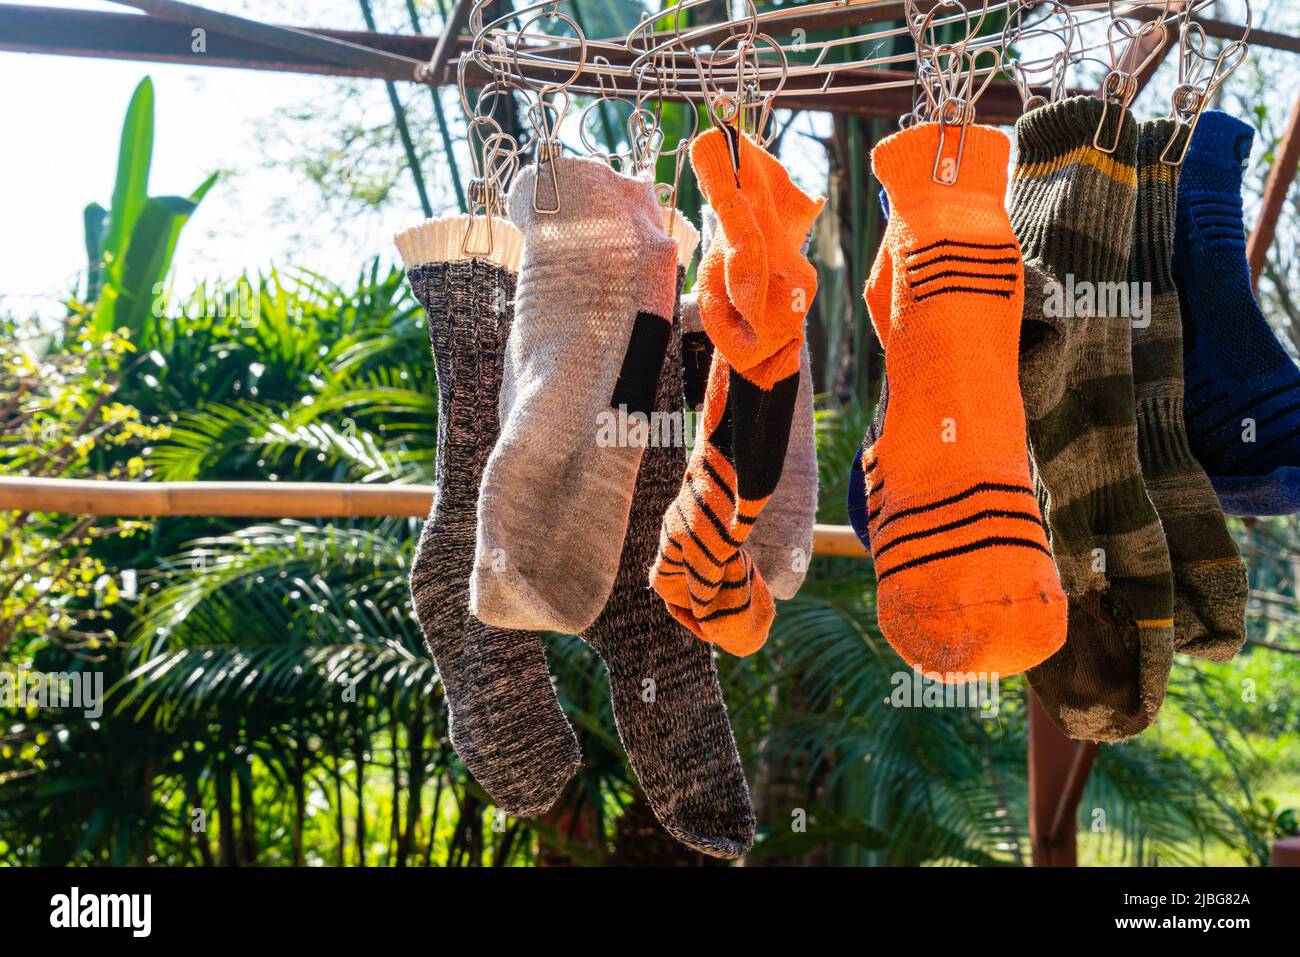 Washing the used socks and drying on the clothesline. After washing the used socks are hanging by clothespins on the clothesline for drying. Stock Photo